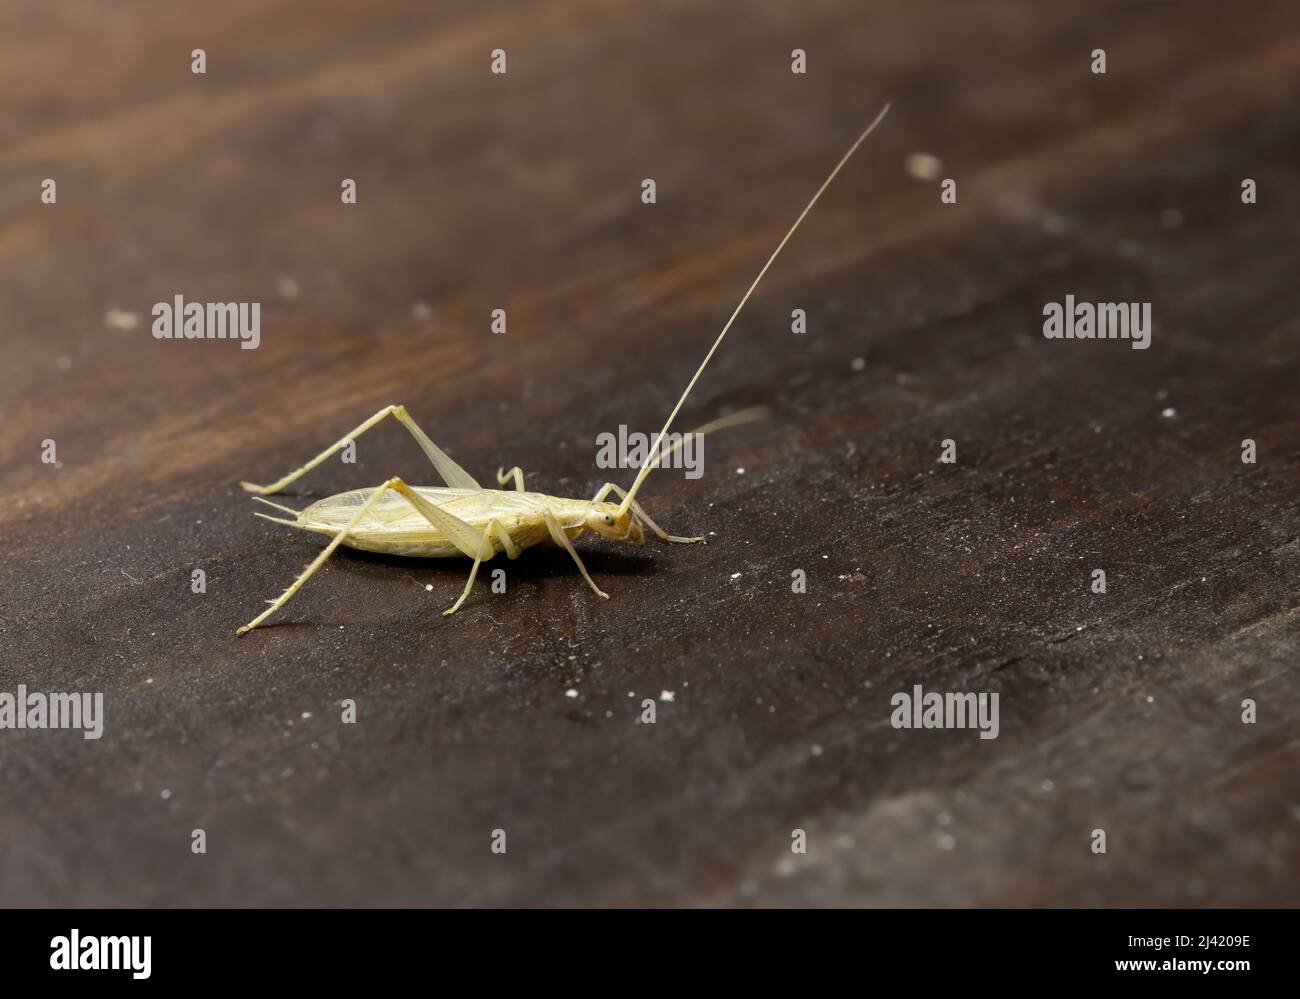 Focus selective on isolated specimen, male of Oecanthus pellucens, common name is Italian tree cricket, wood background Stock Photo